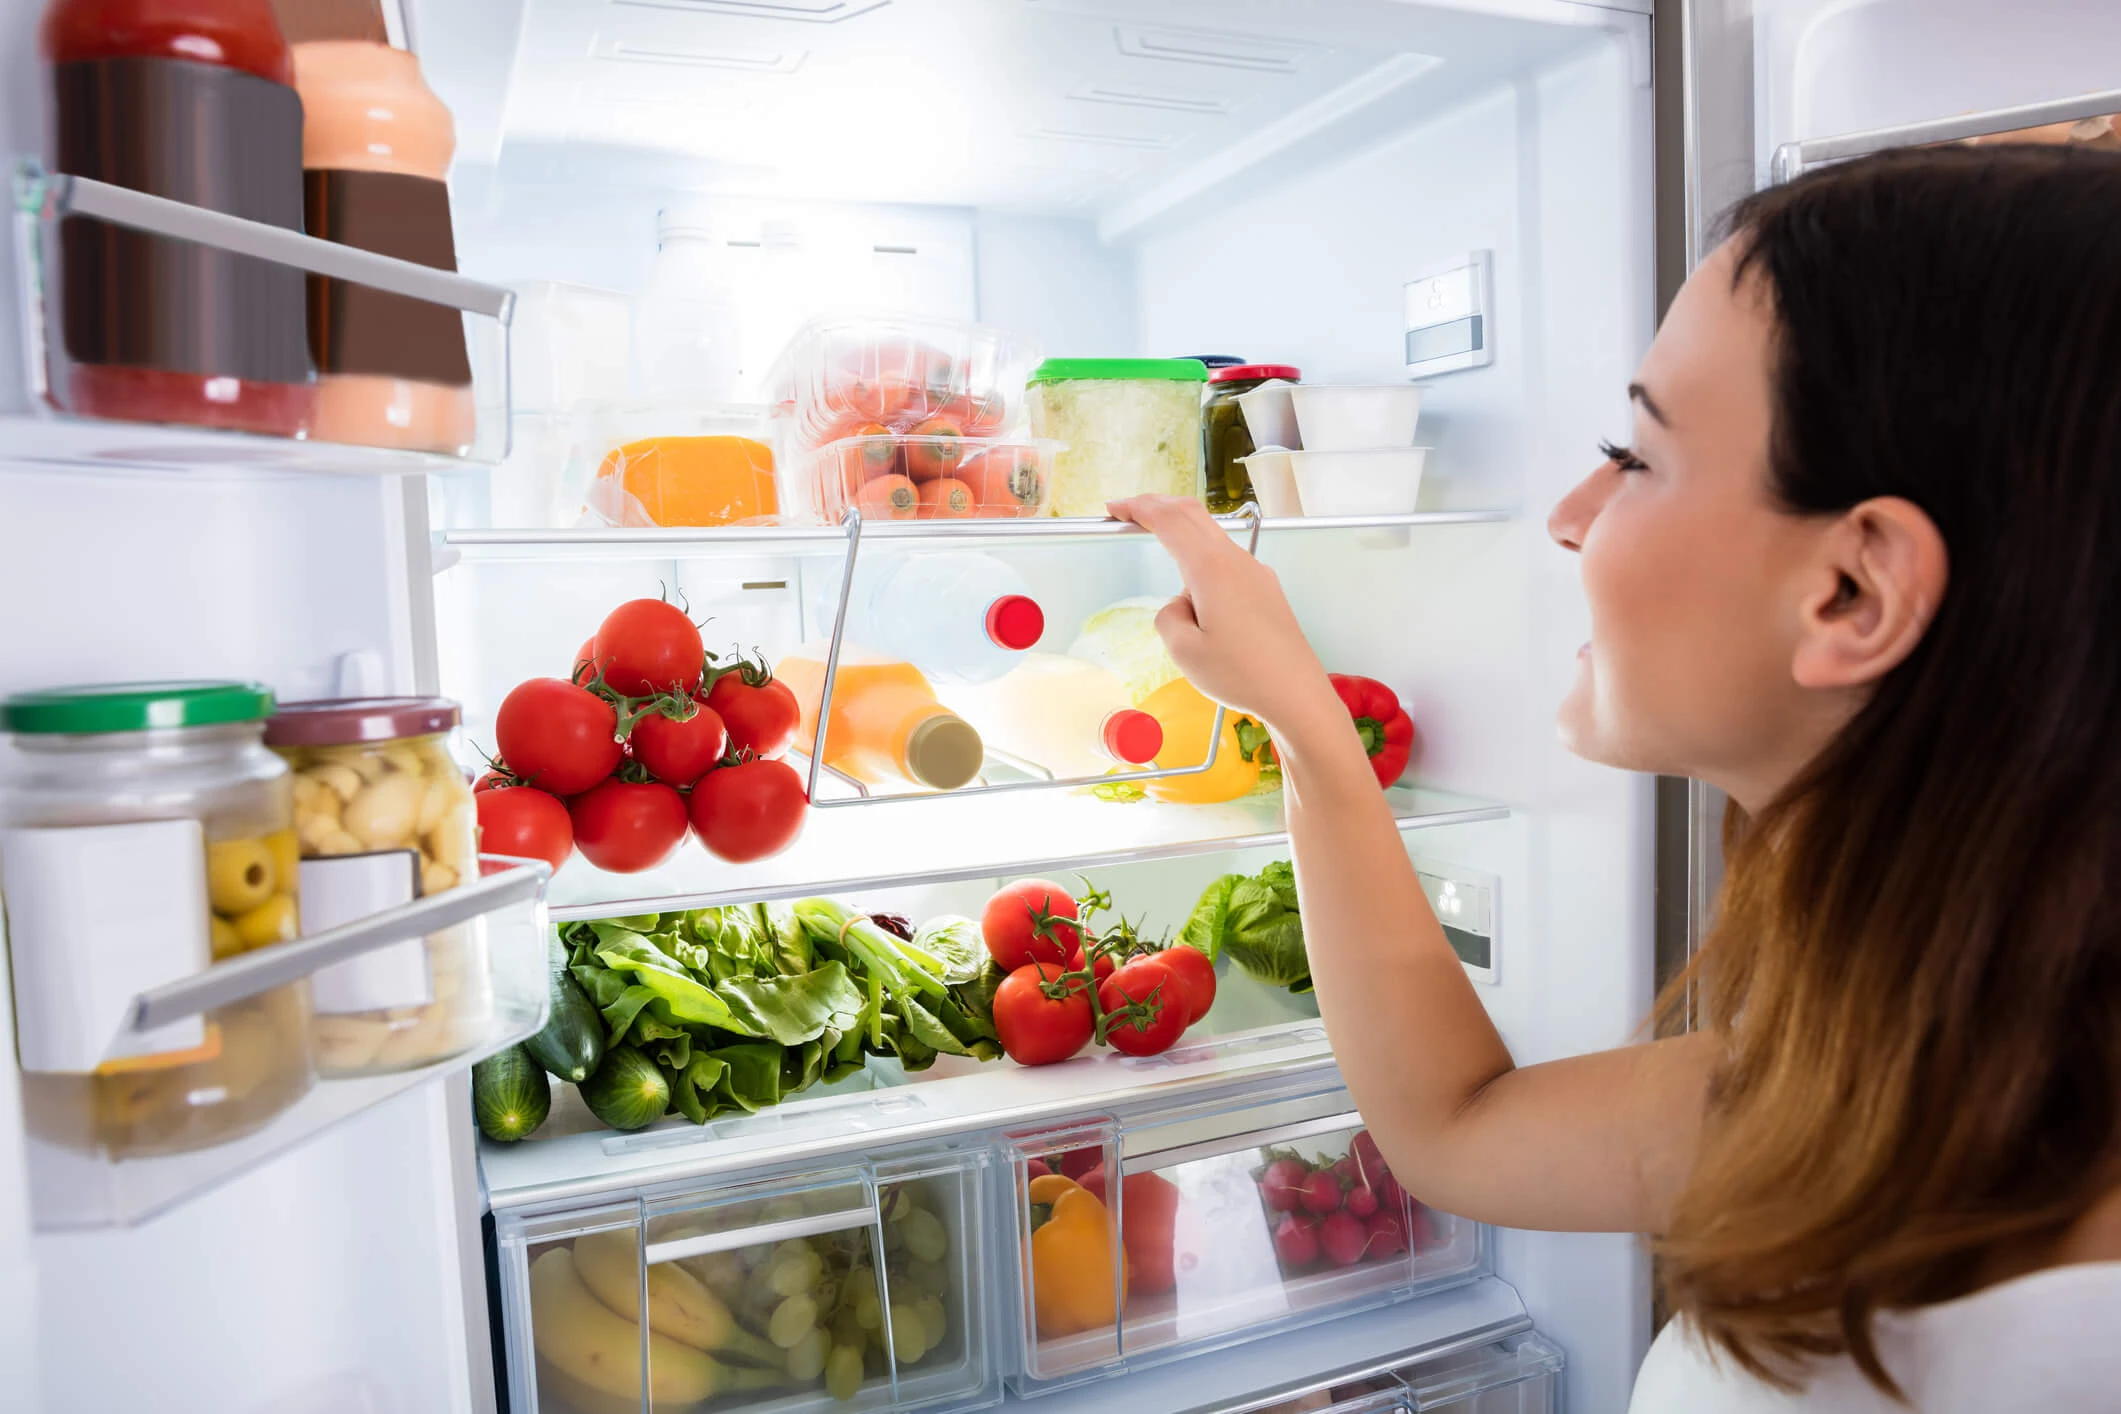 Woman getting food out of refrigerator